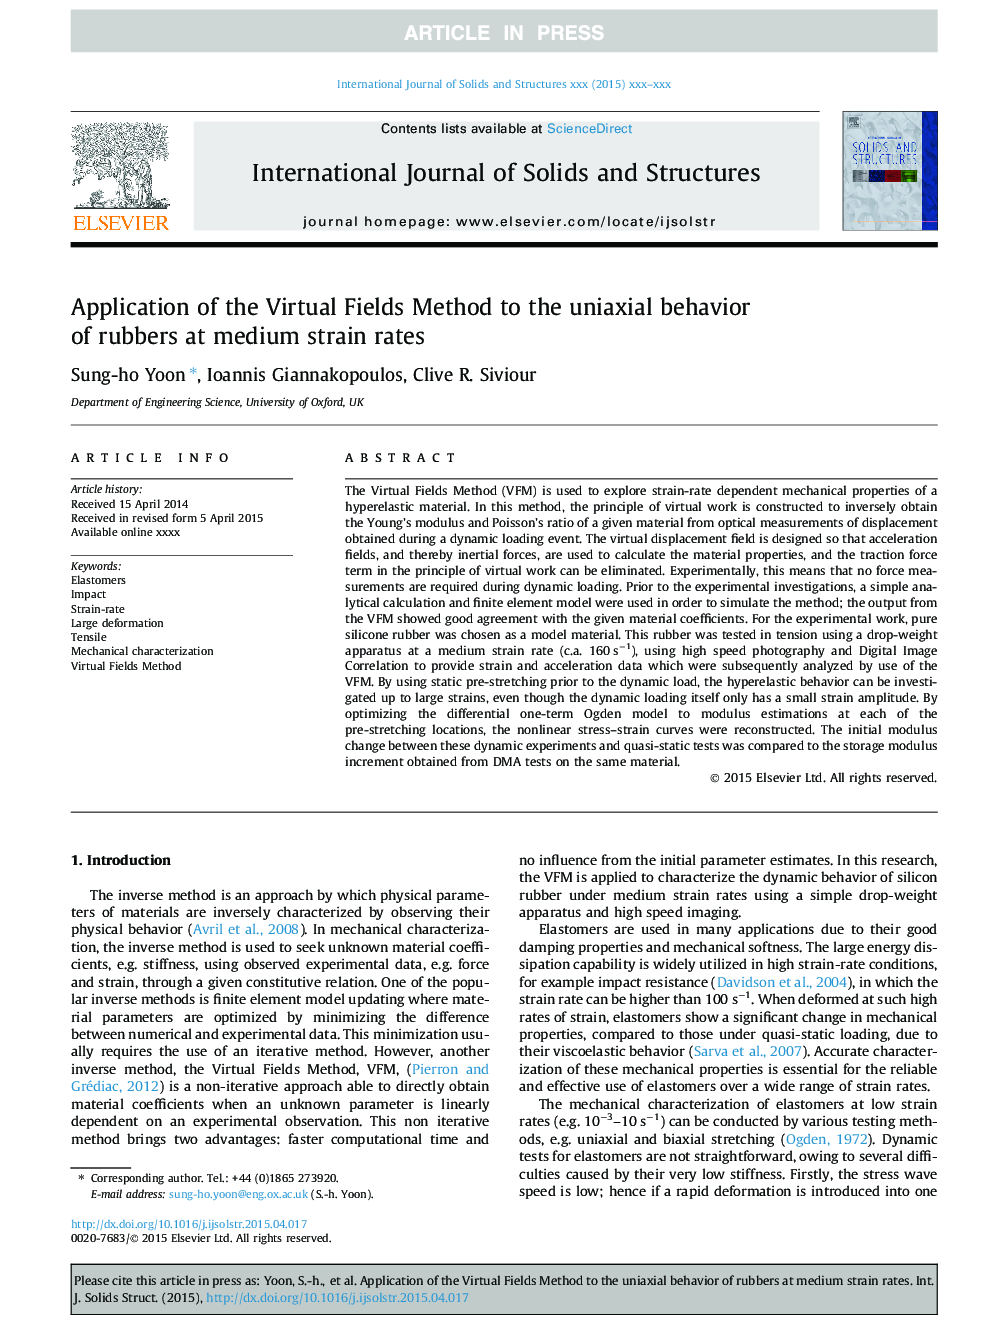 Application of the Virtual Fields Method to the uniaxial behavior of rubbers at medium strain rates